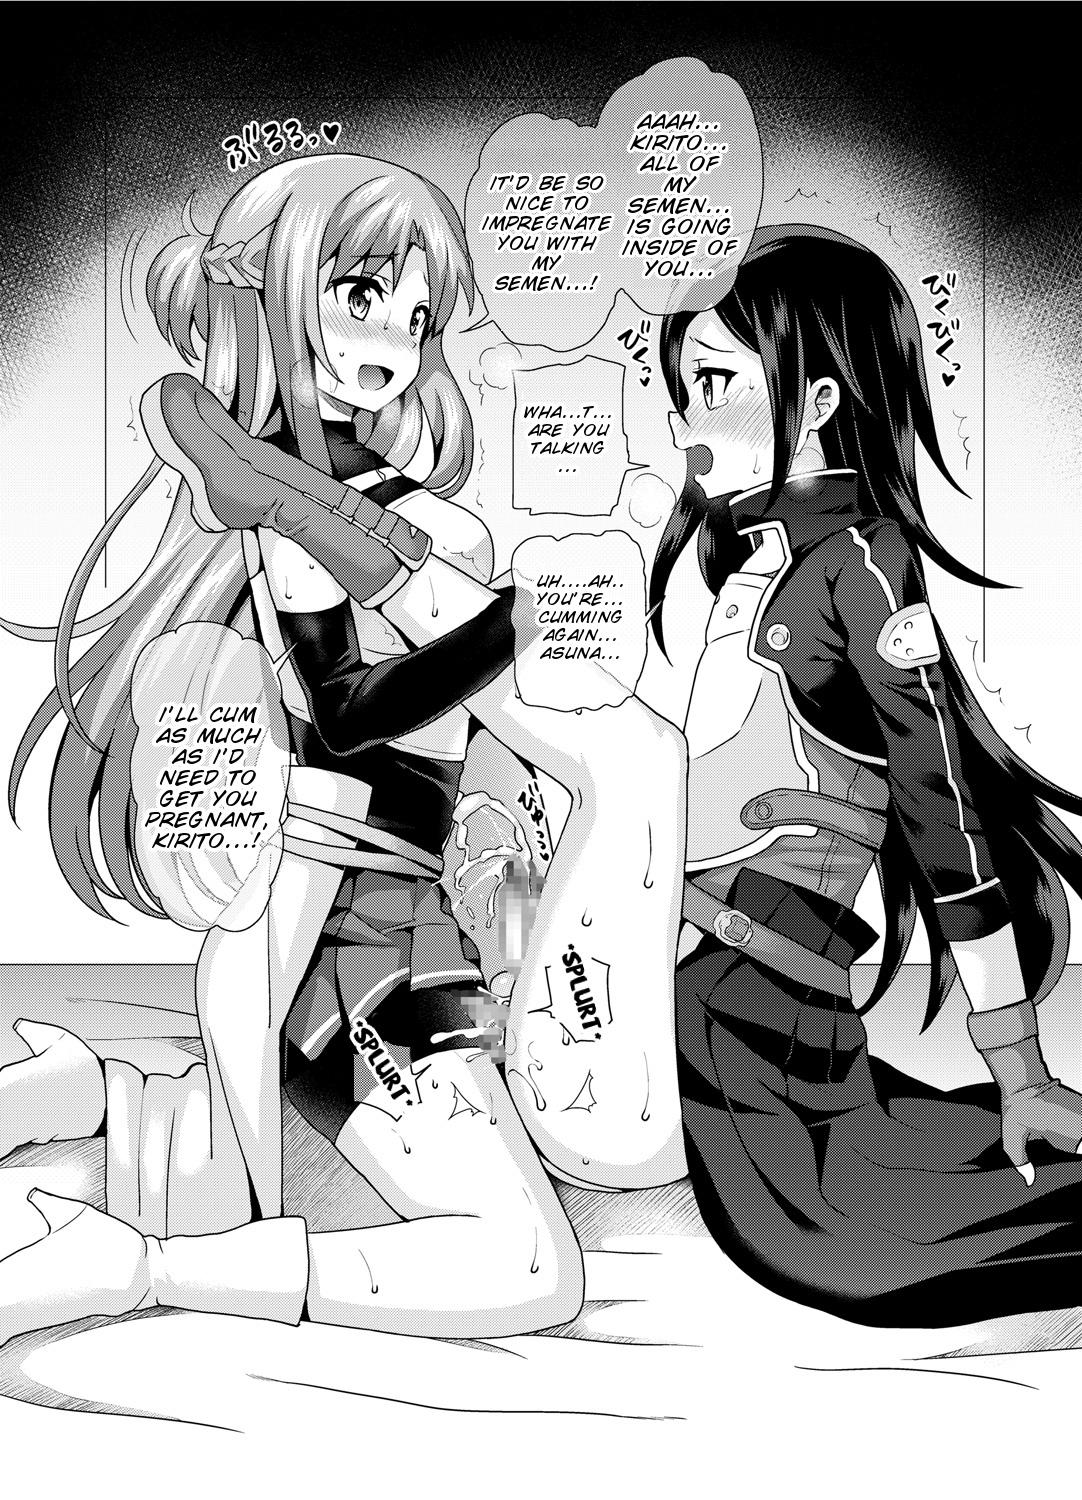 Shoes Sword of Asuna - Sword art online Whore - Page 9